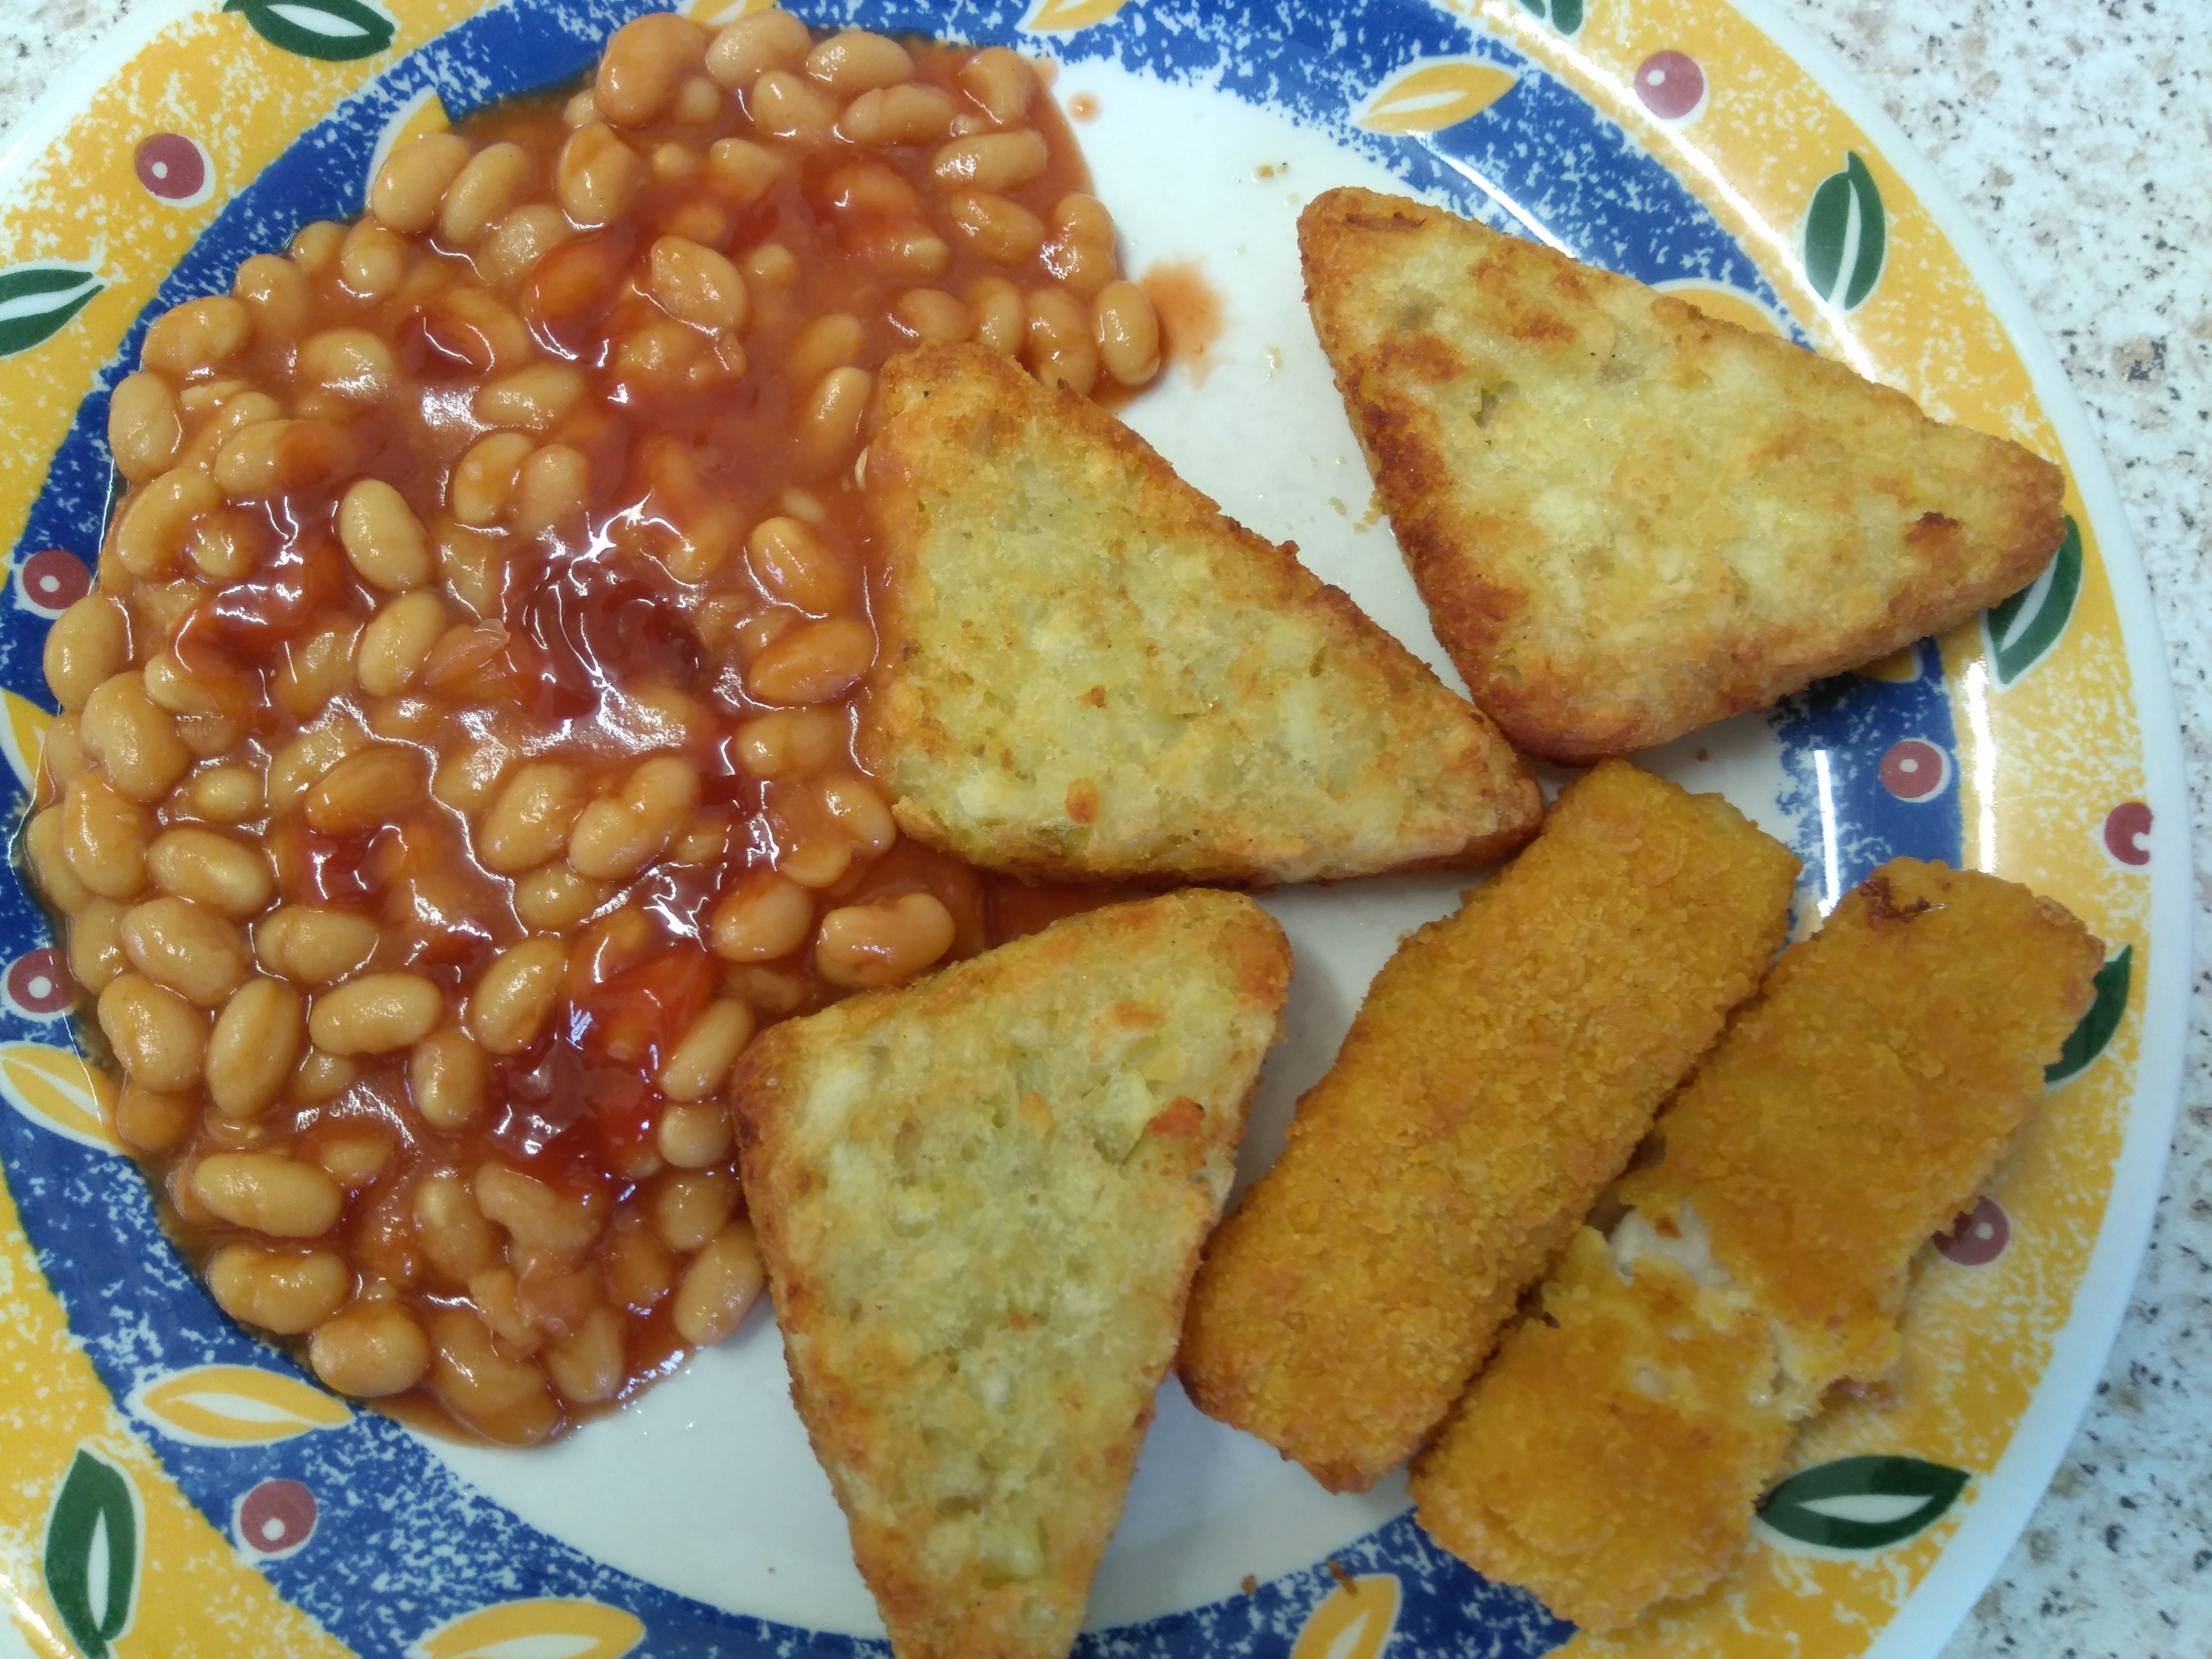 hash browns, fish fingers and beans